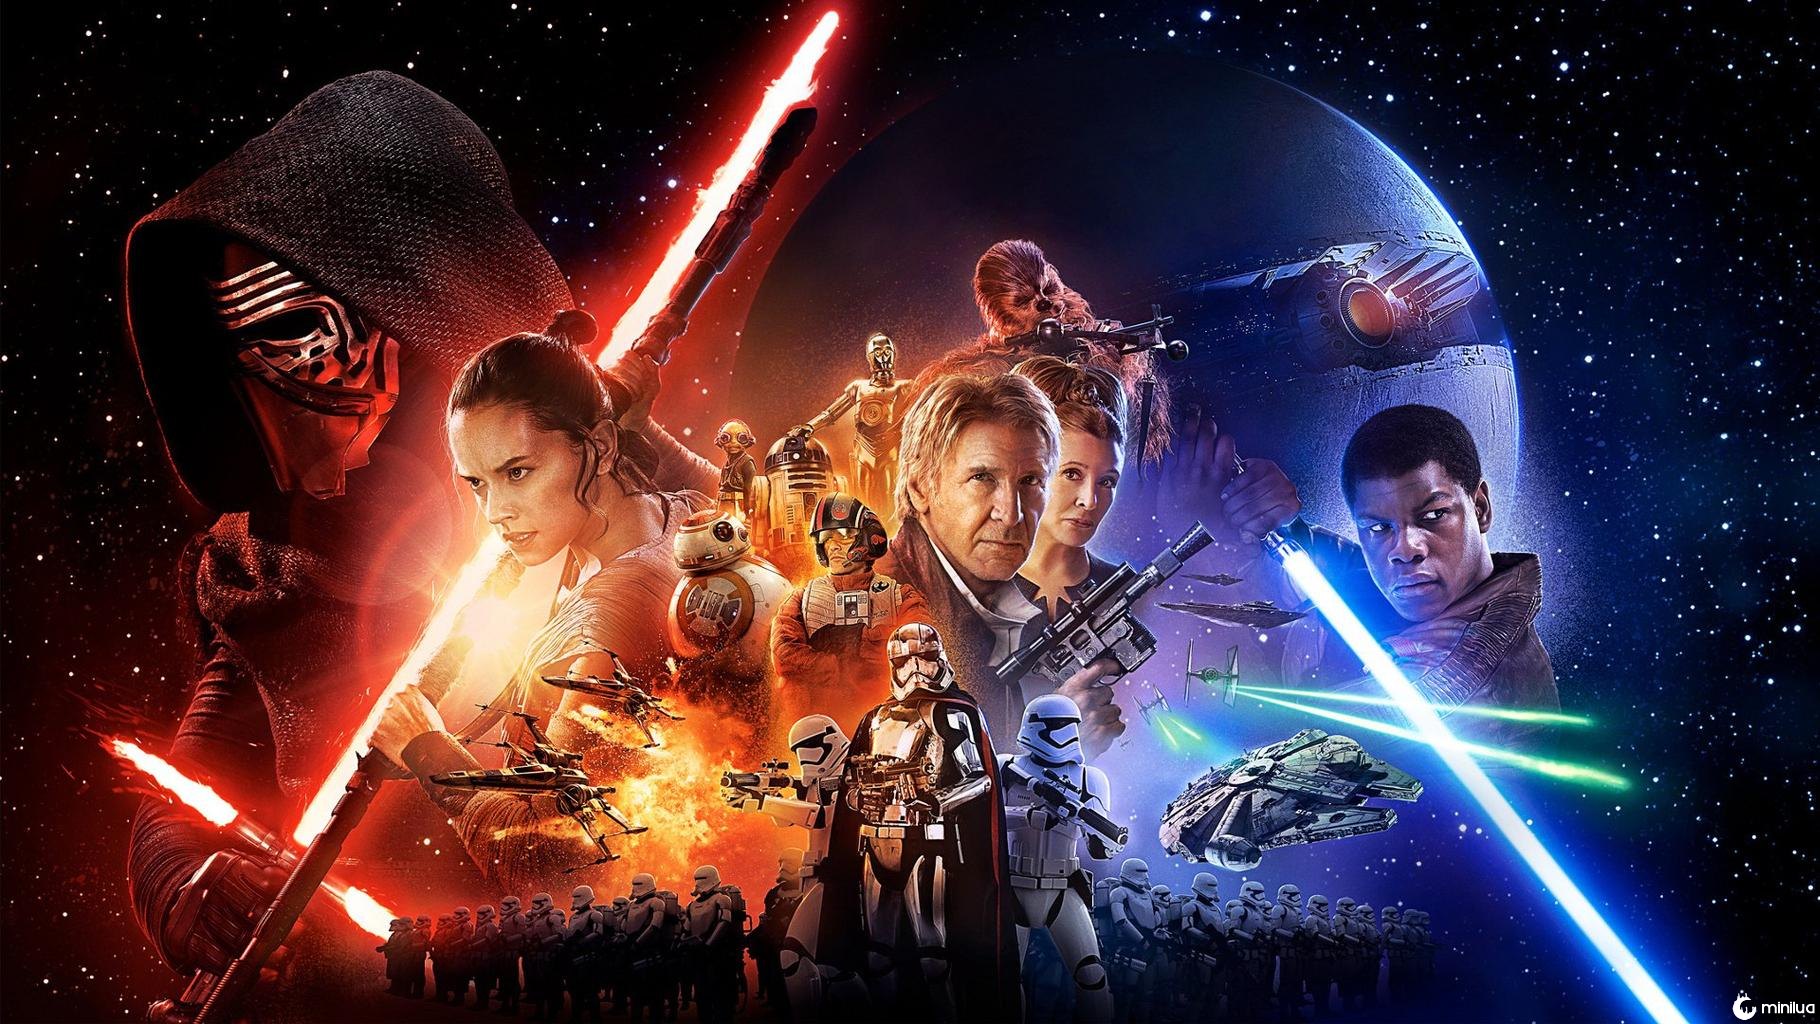 Star Wars: The Force Awakens Review | Star Wars 7 | Movies - Empire